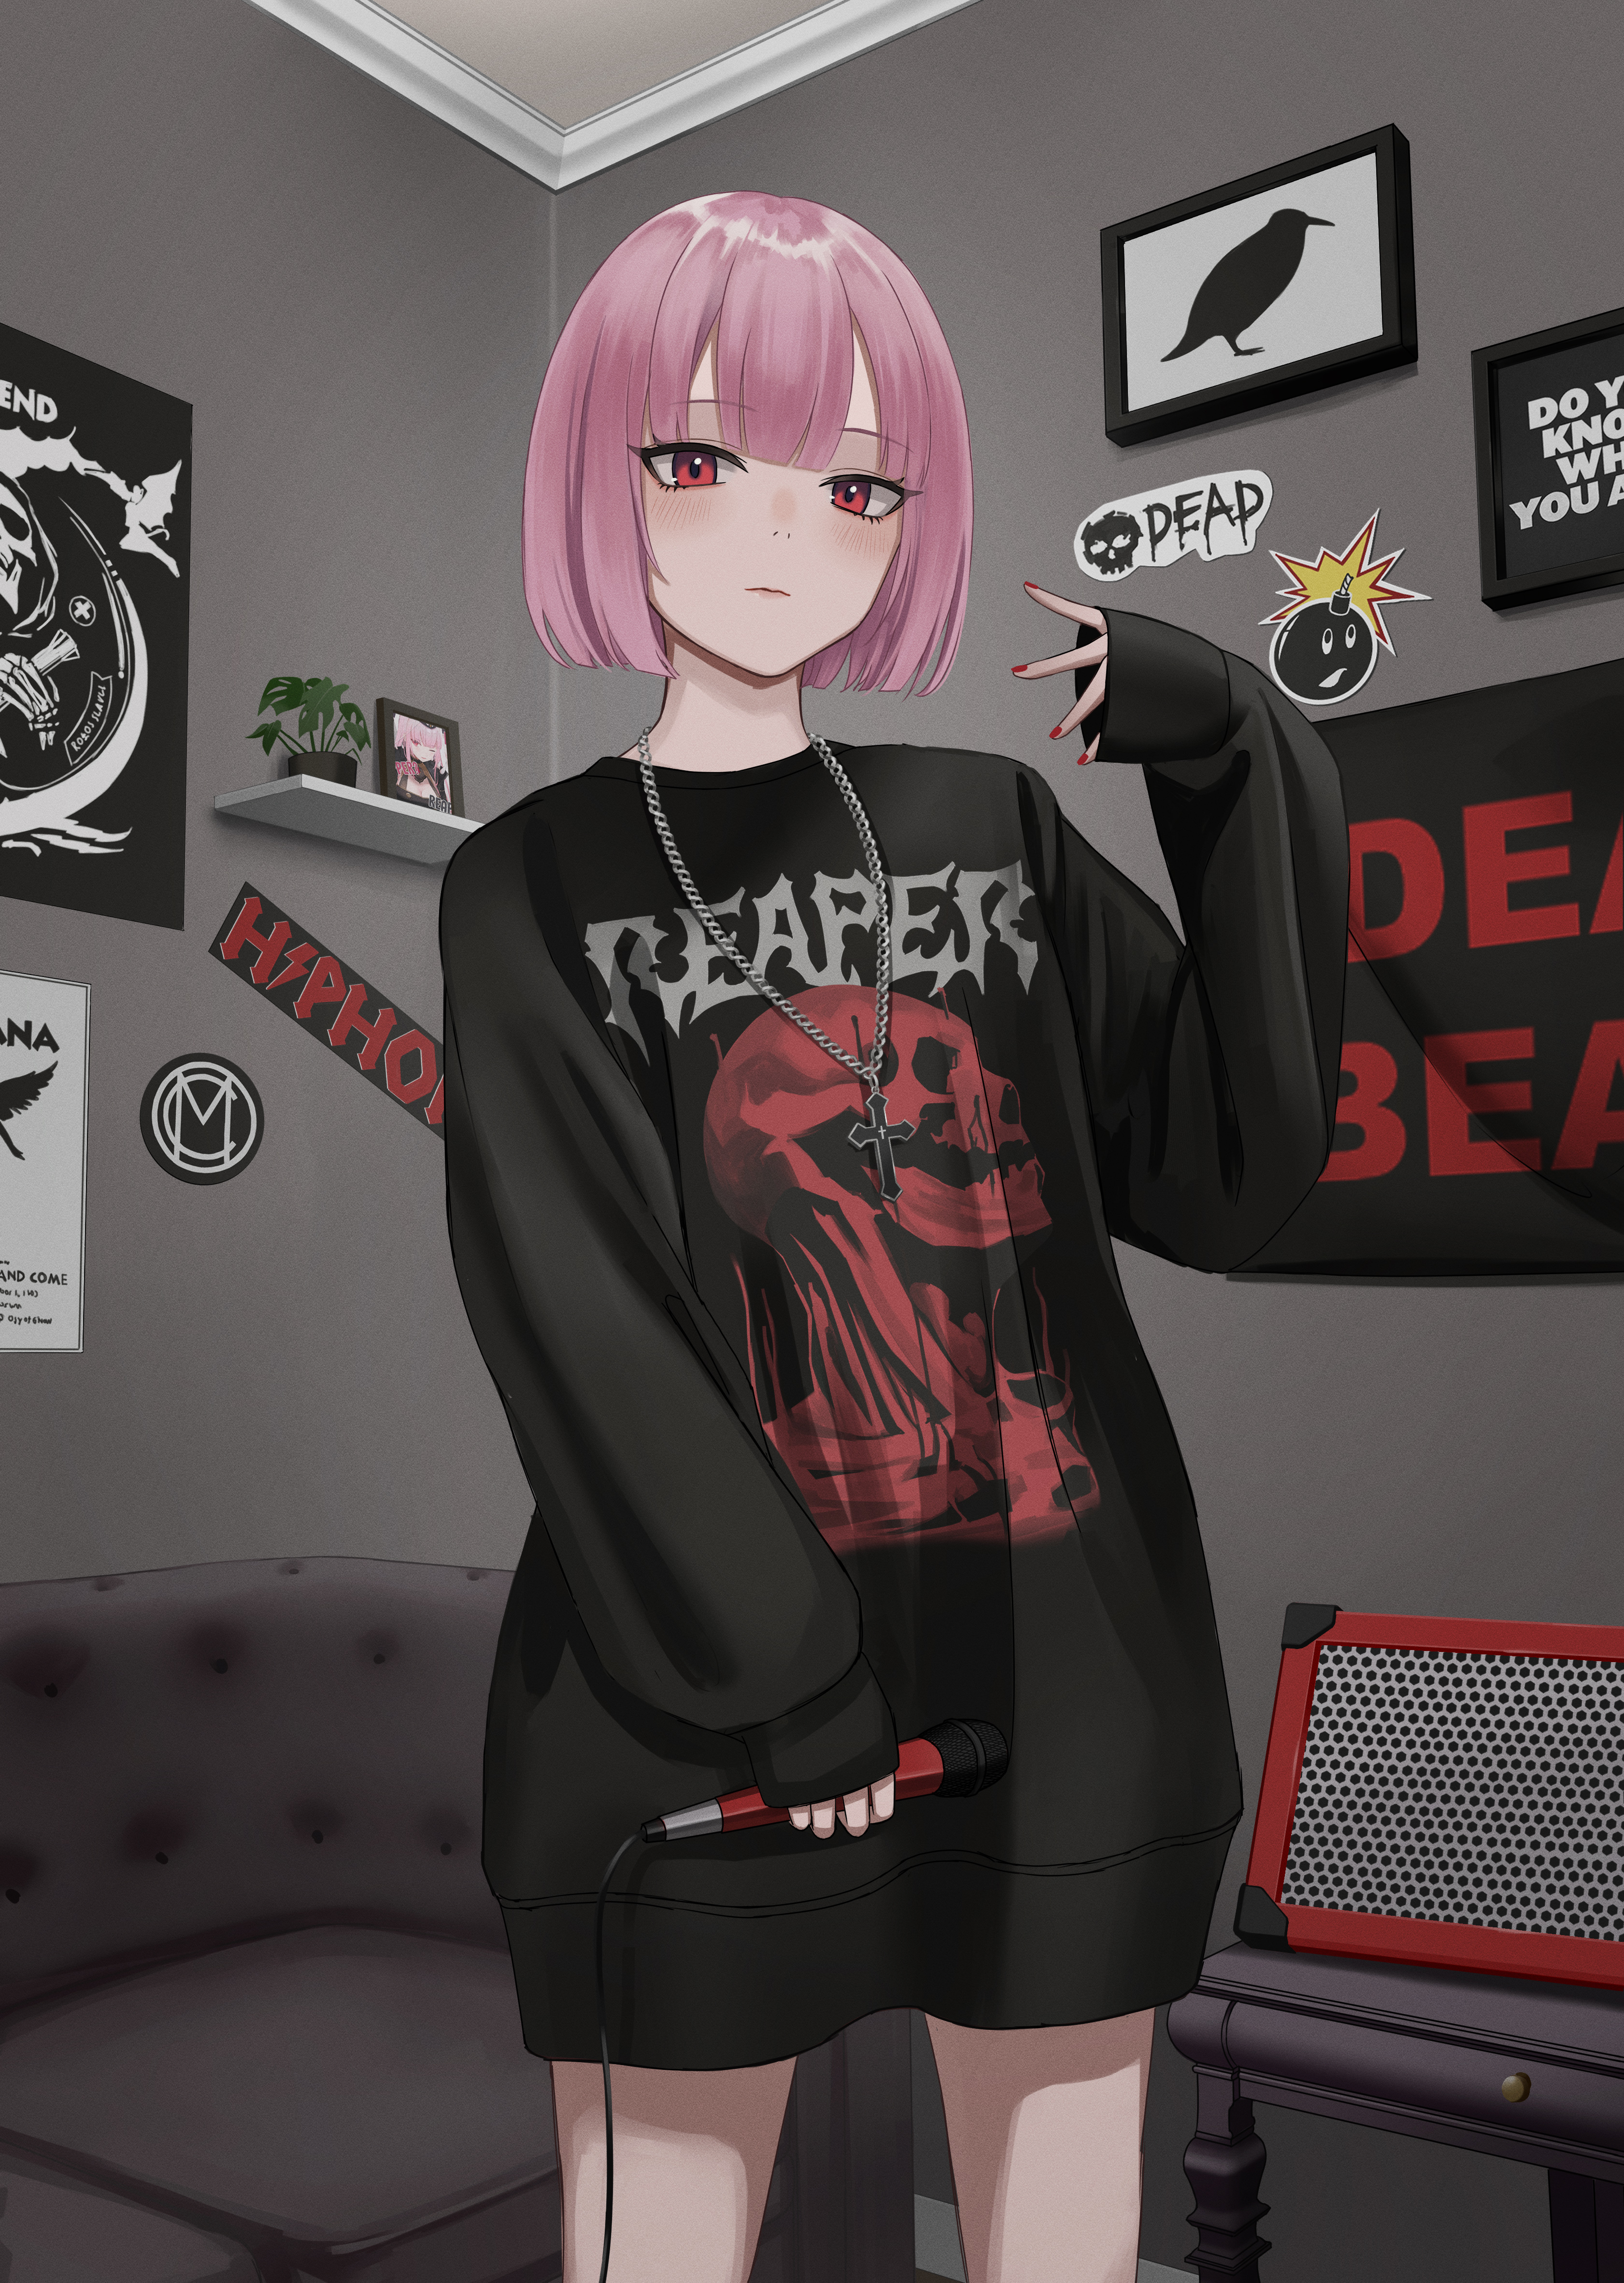 Looking At Viewer Digital Digital Art Anime Anime Girls Pink Hair Red Eyes  Bedroom Peace Sign Poster Wallpaper - Resolution:3362x4725 - ID:1281641 -  